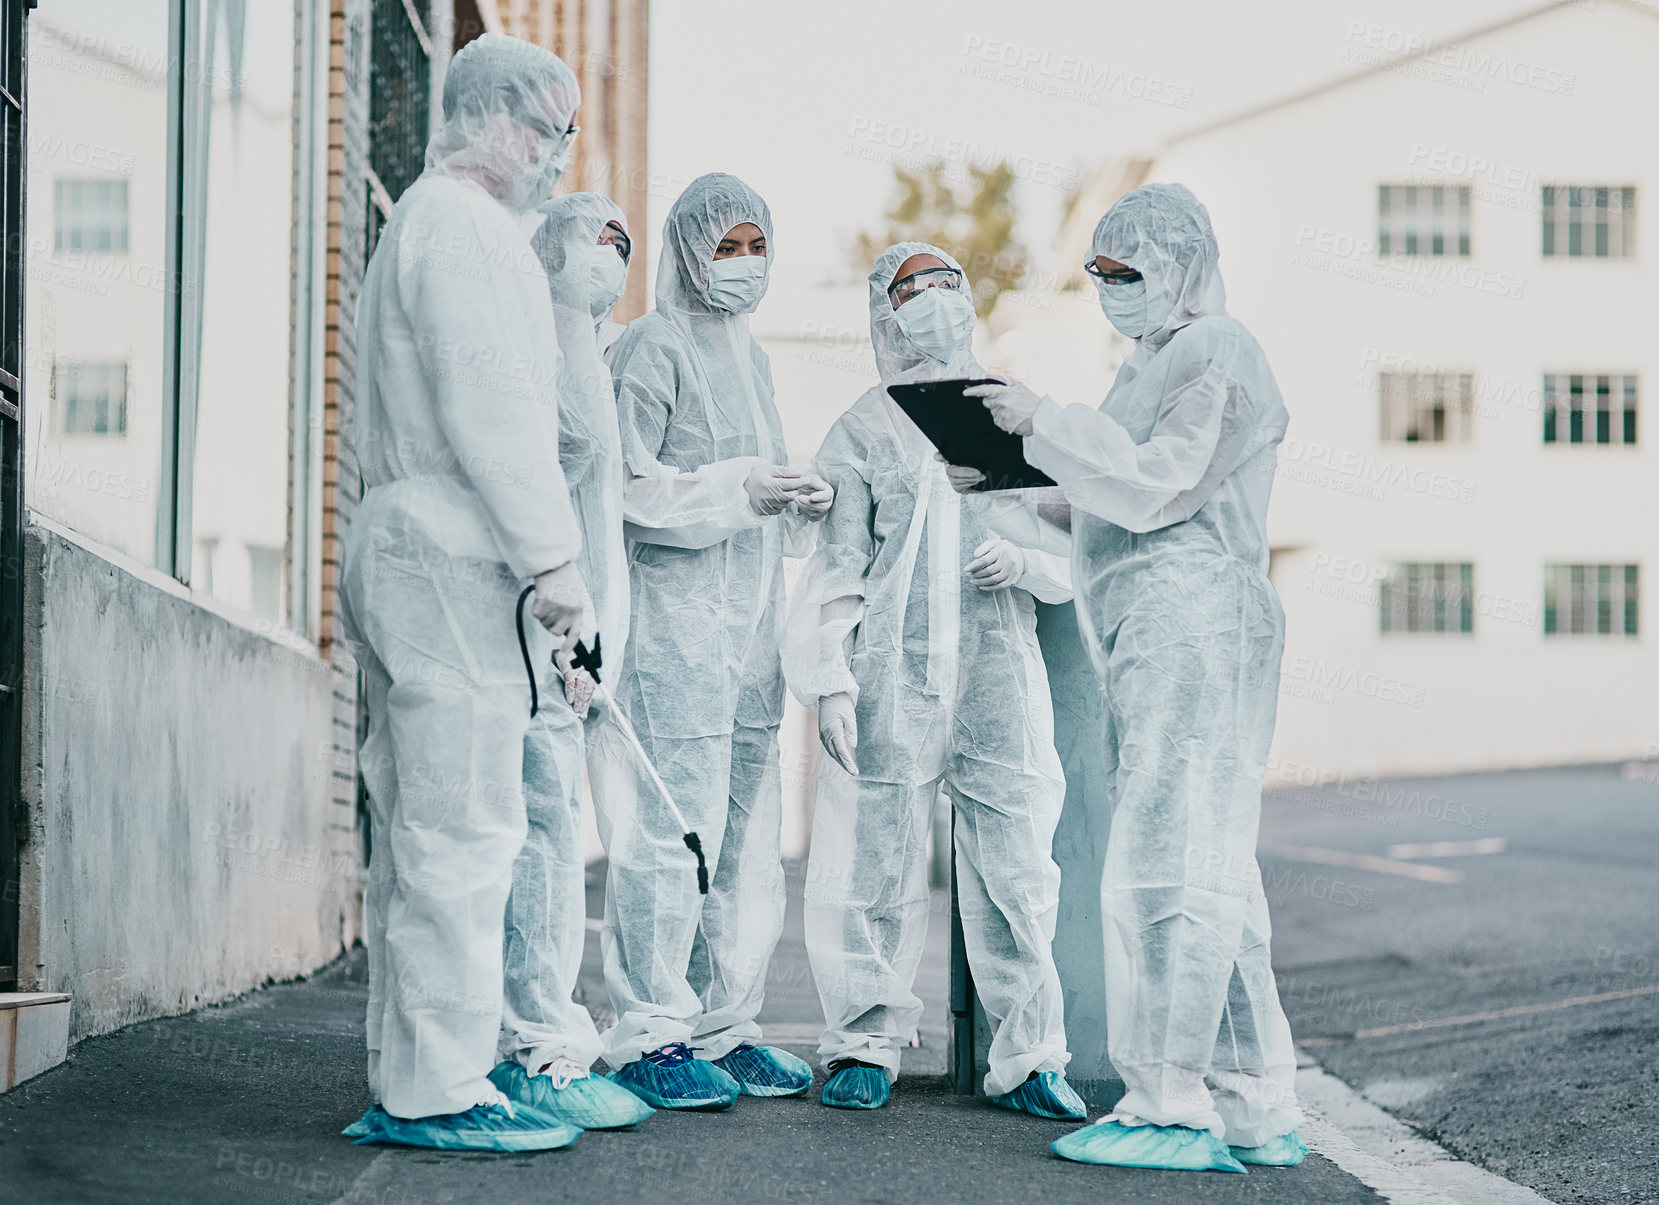 Buy stock photo Covid, pandemic and healthcare team wearing protective ppe to prevent virus spread at a quarantine site. First responders wearing hazmat suits while discussing plan for cleaning and disinfecting 